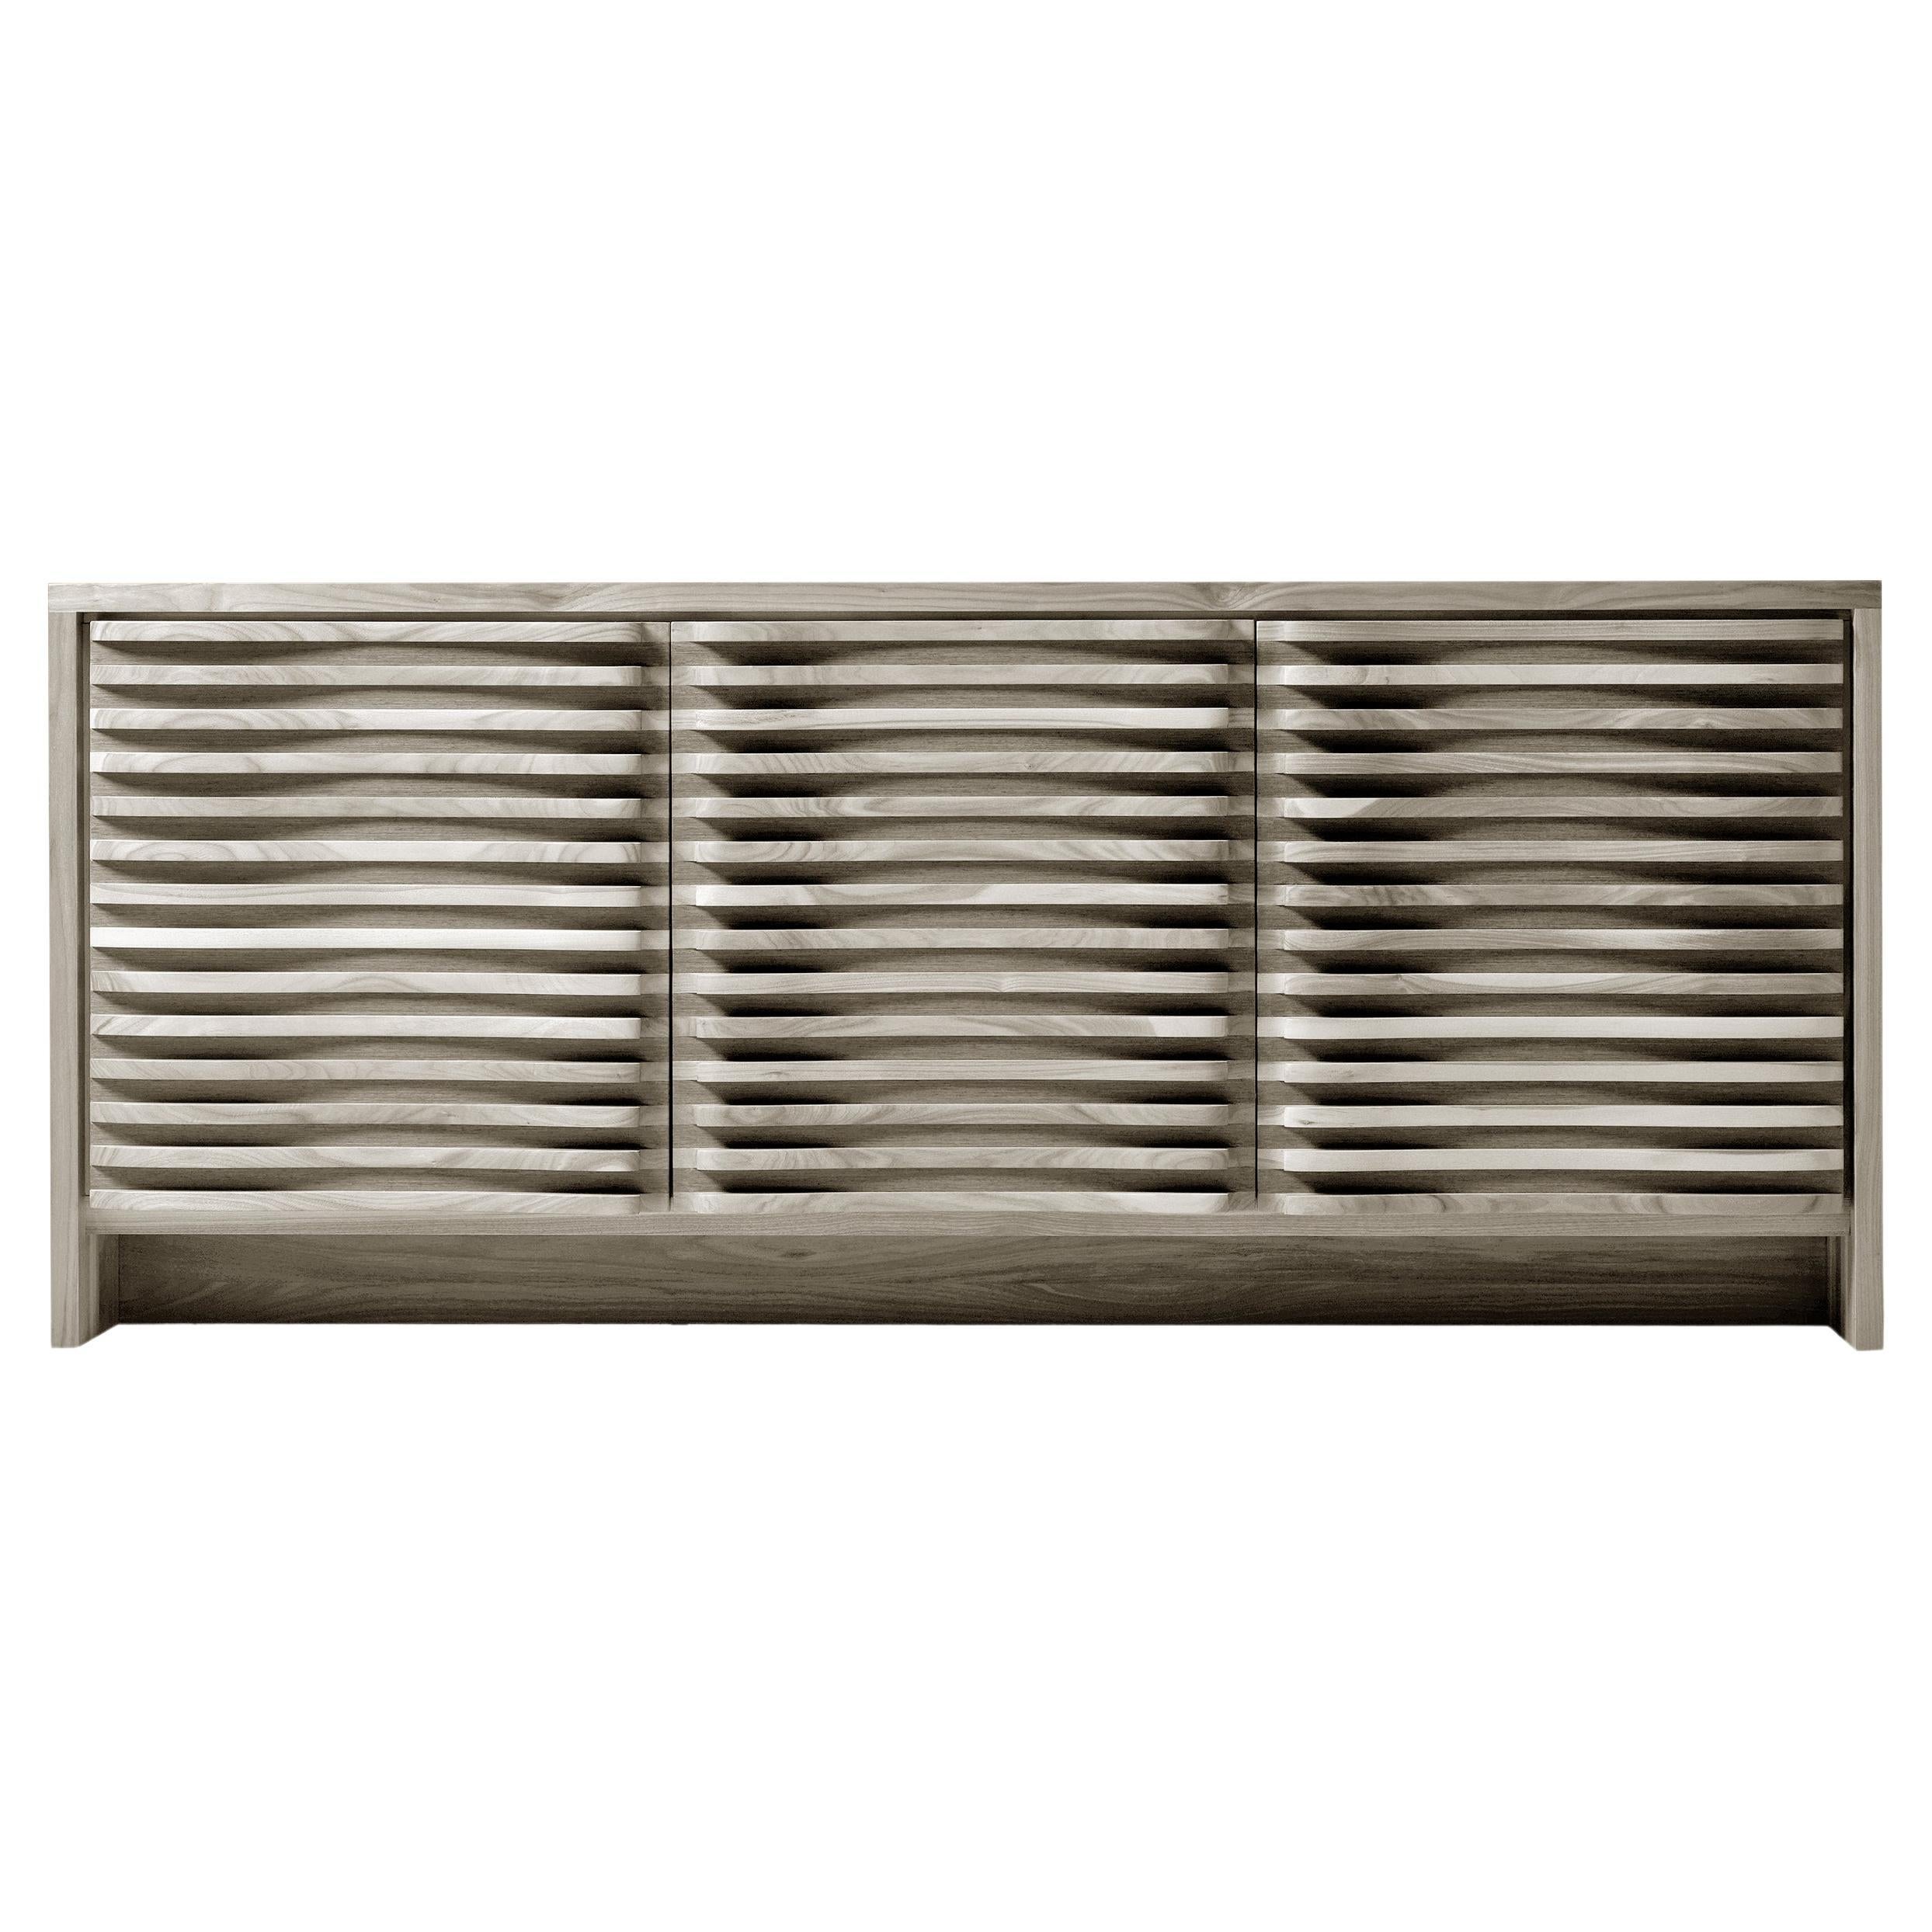 Sinuo Solid Wood Sideboard, Walnut in Natural Grey Finish, Contemporary